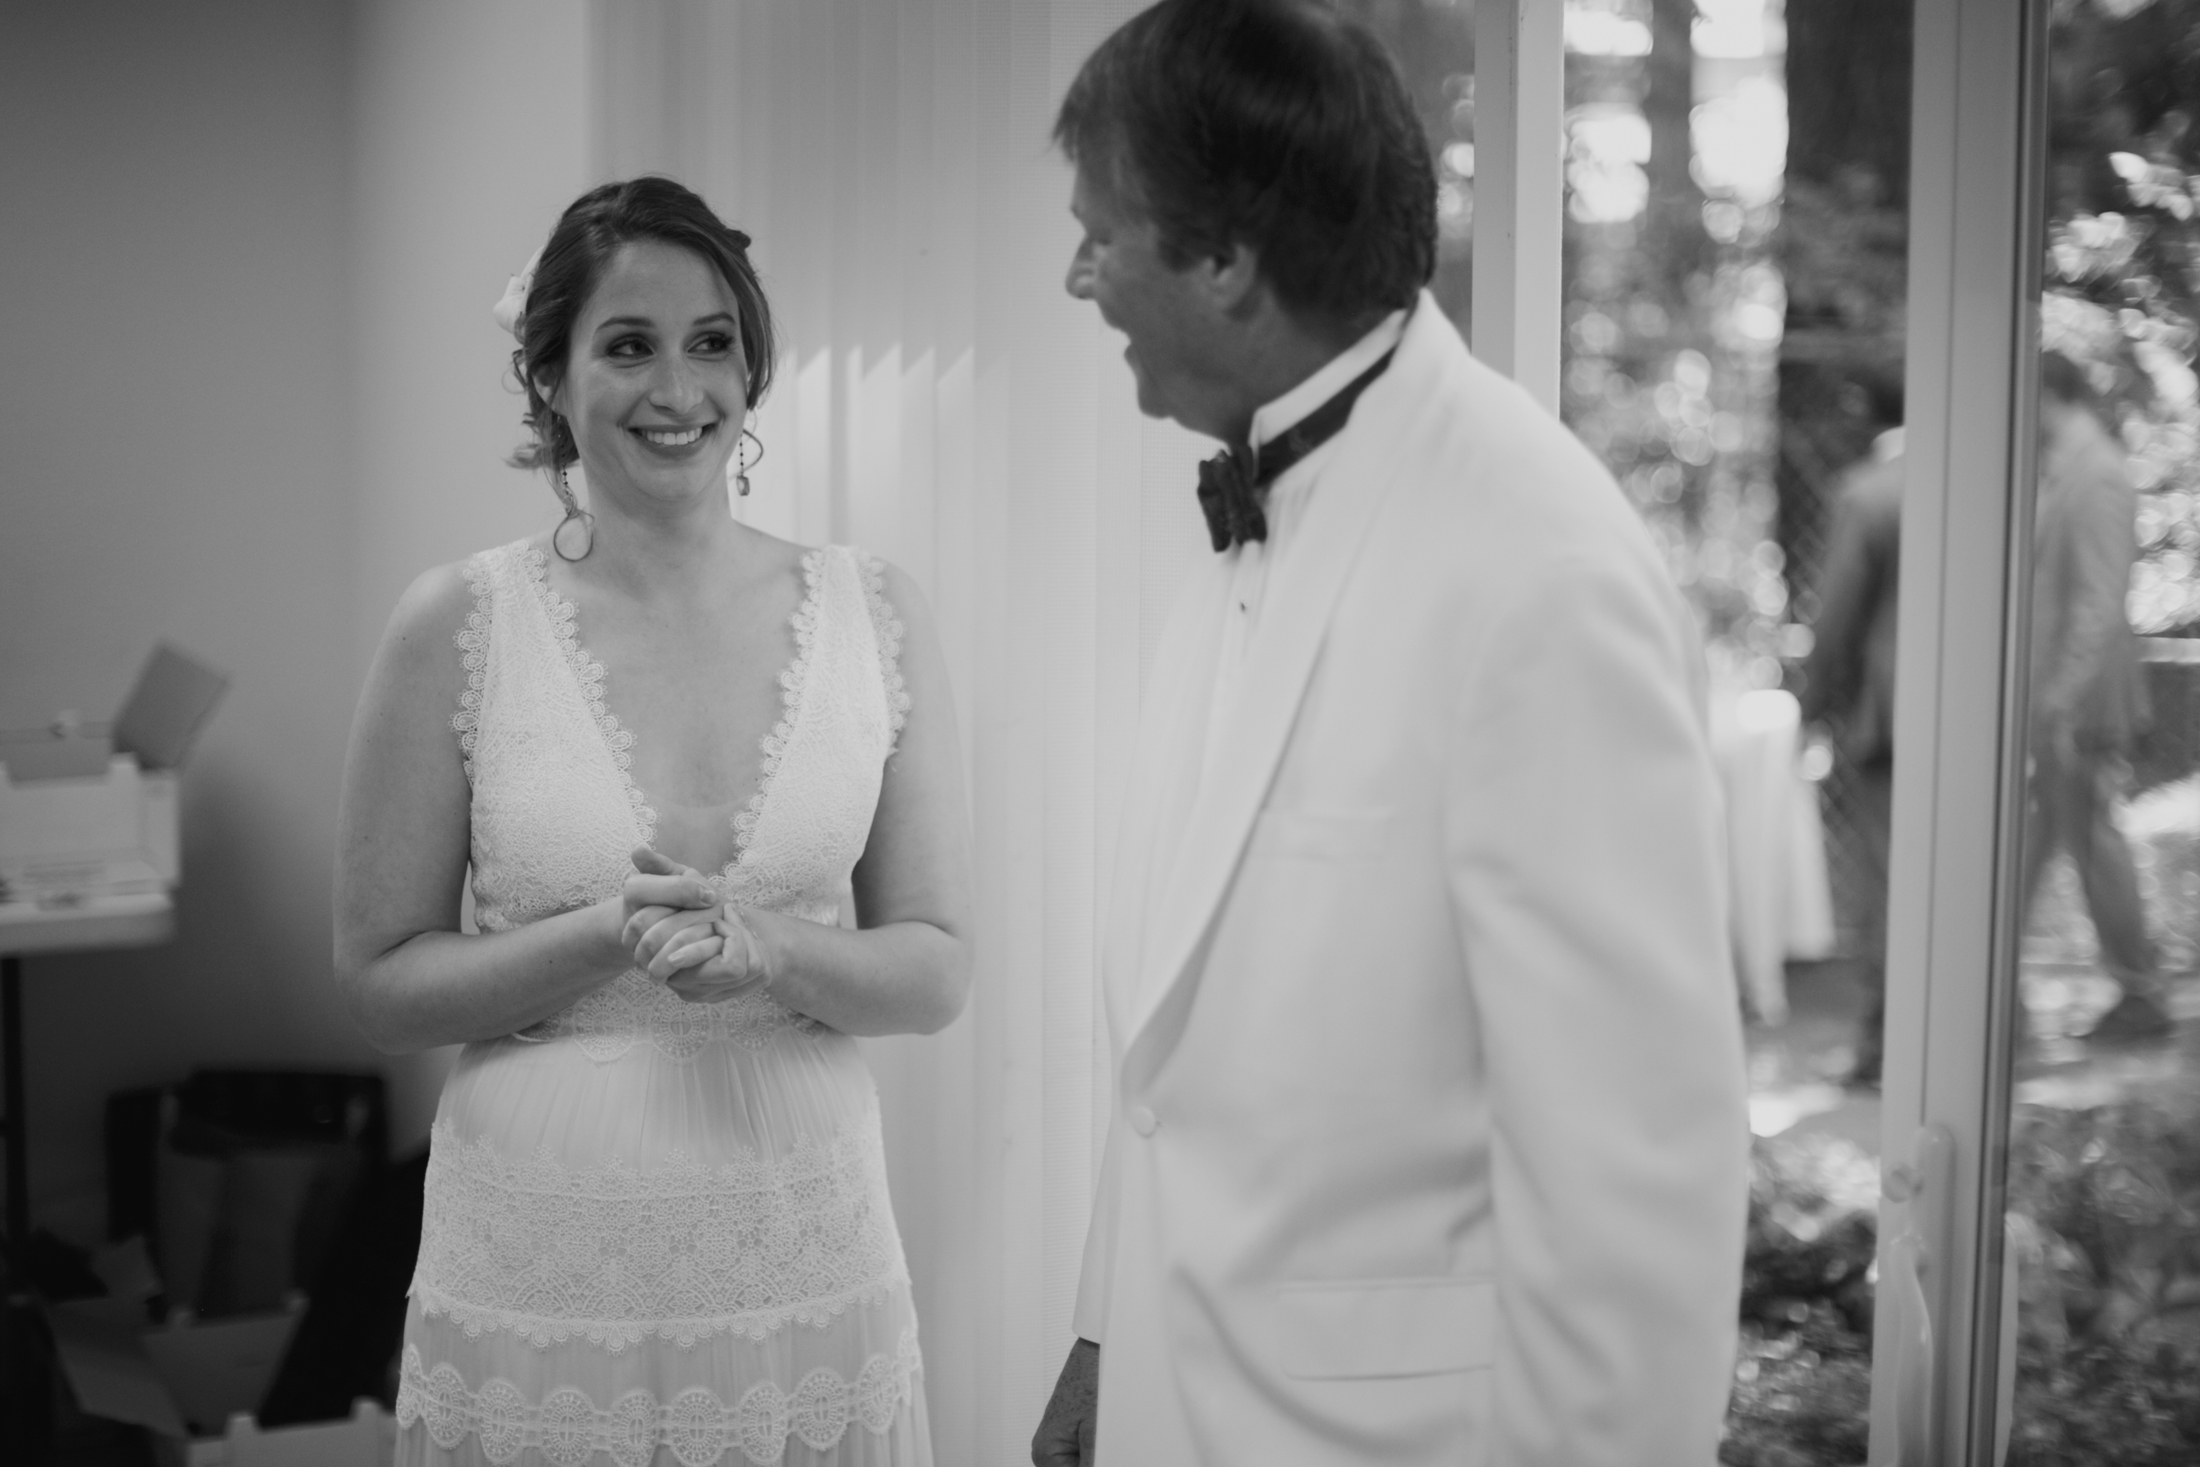 A black and white of the bride and her father smiling at each other as he enters the room and sees her for the first time.